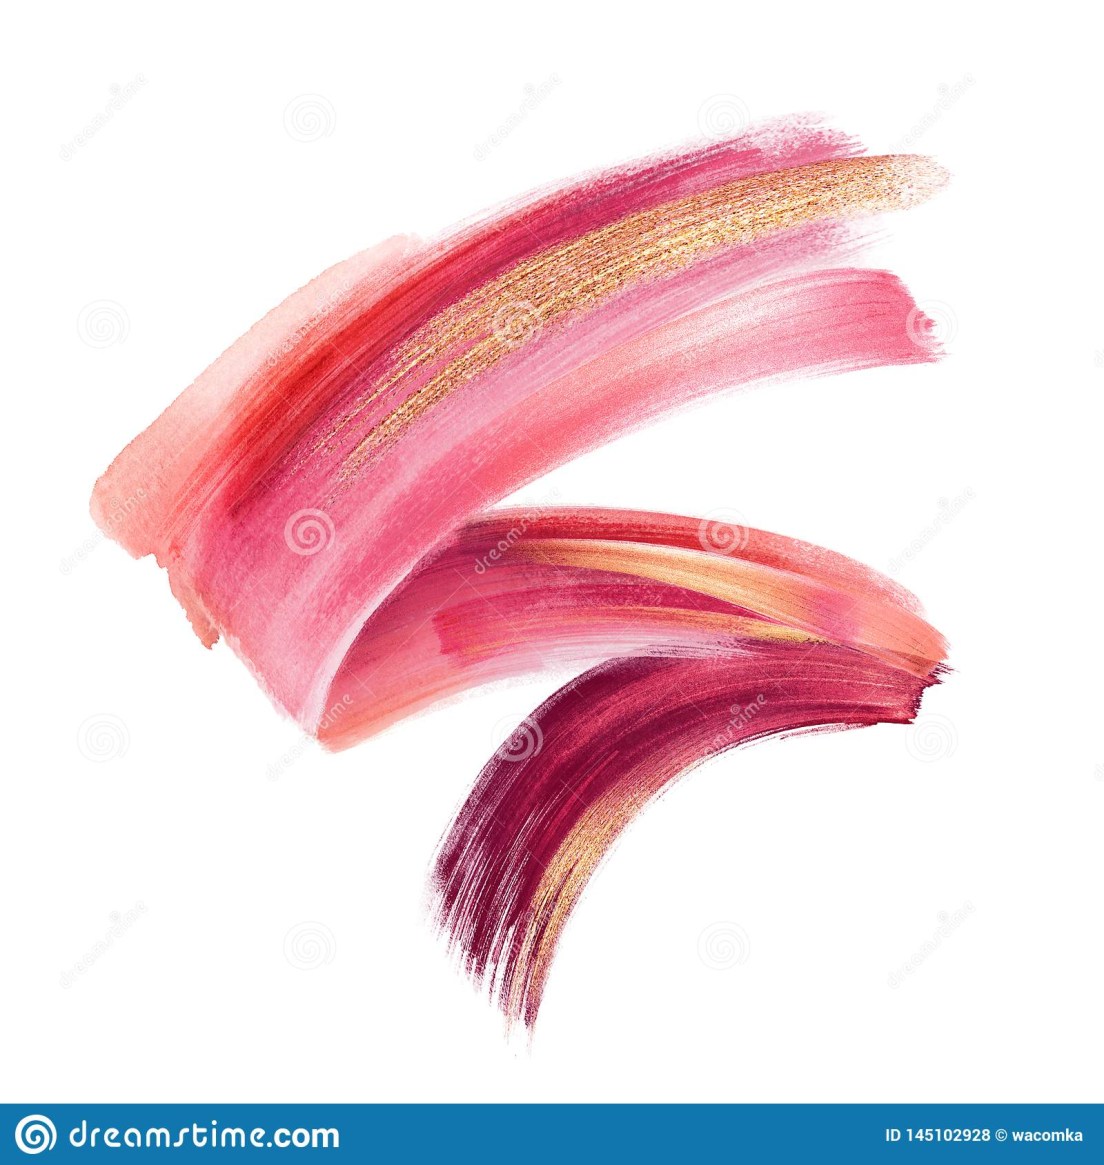 Picture of: Digital Illustration, Red Pink Gold Paint, Brush Stroke Isolated